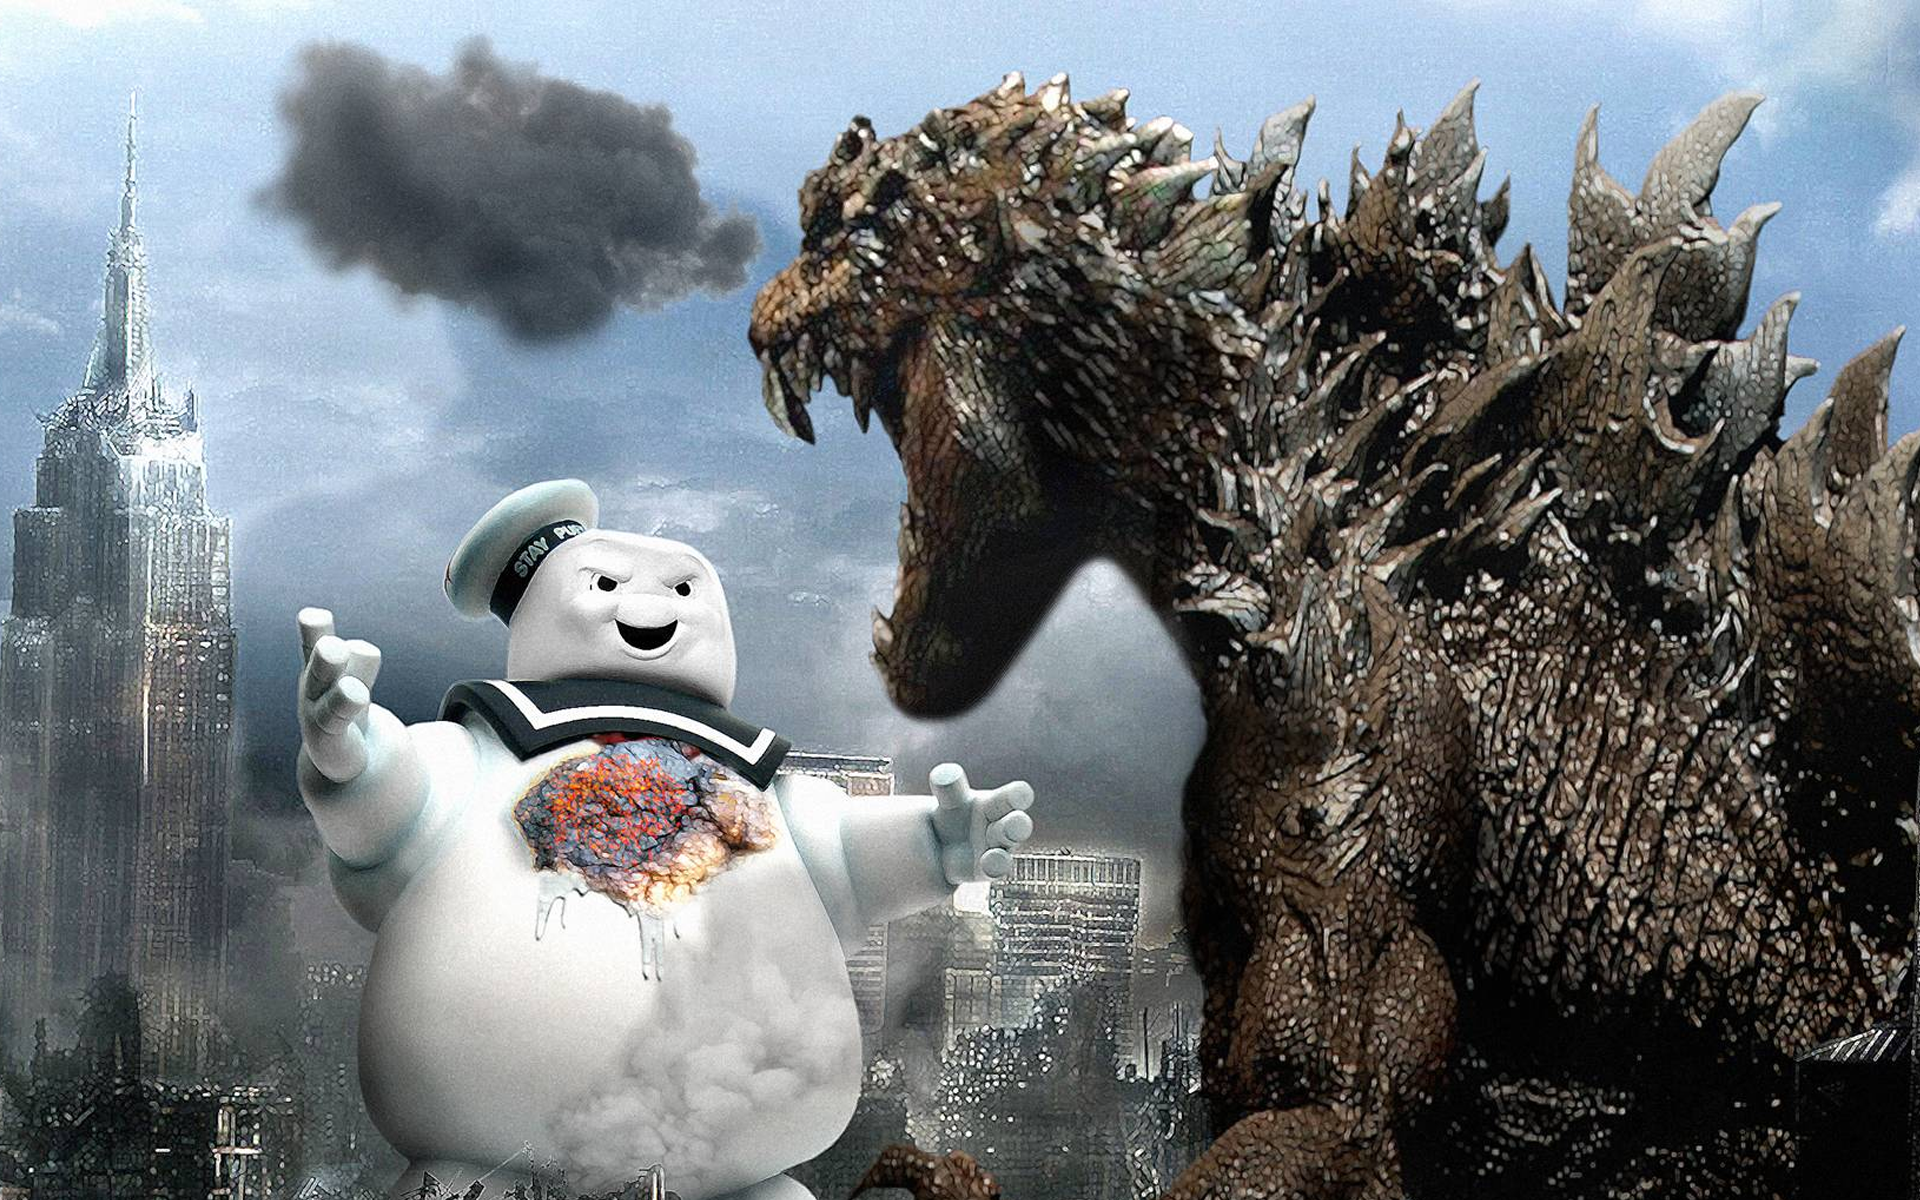 Godzilla Vs The Stay Puft Marshmallow Man From Ghostbusters